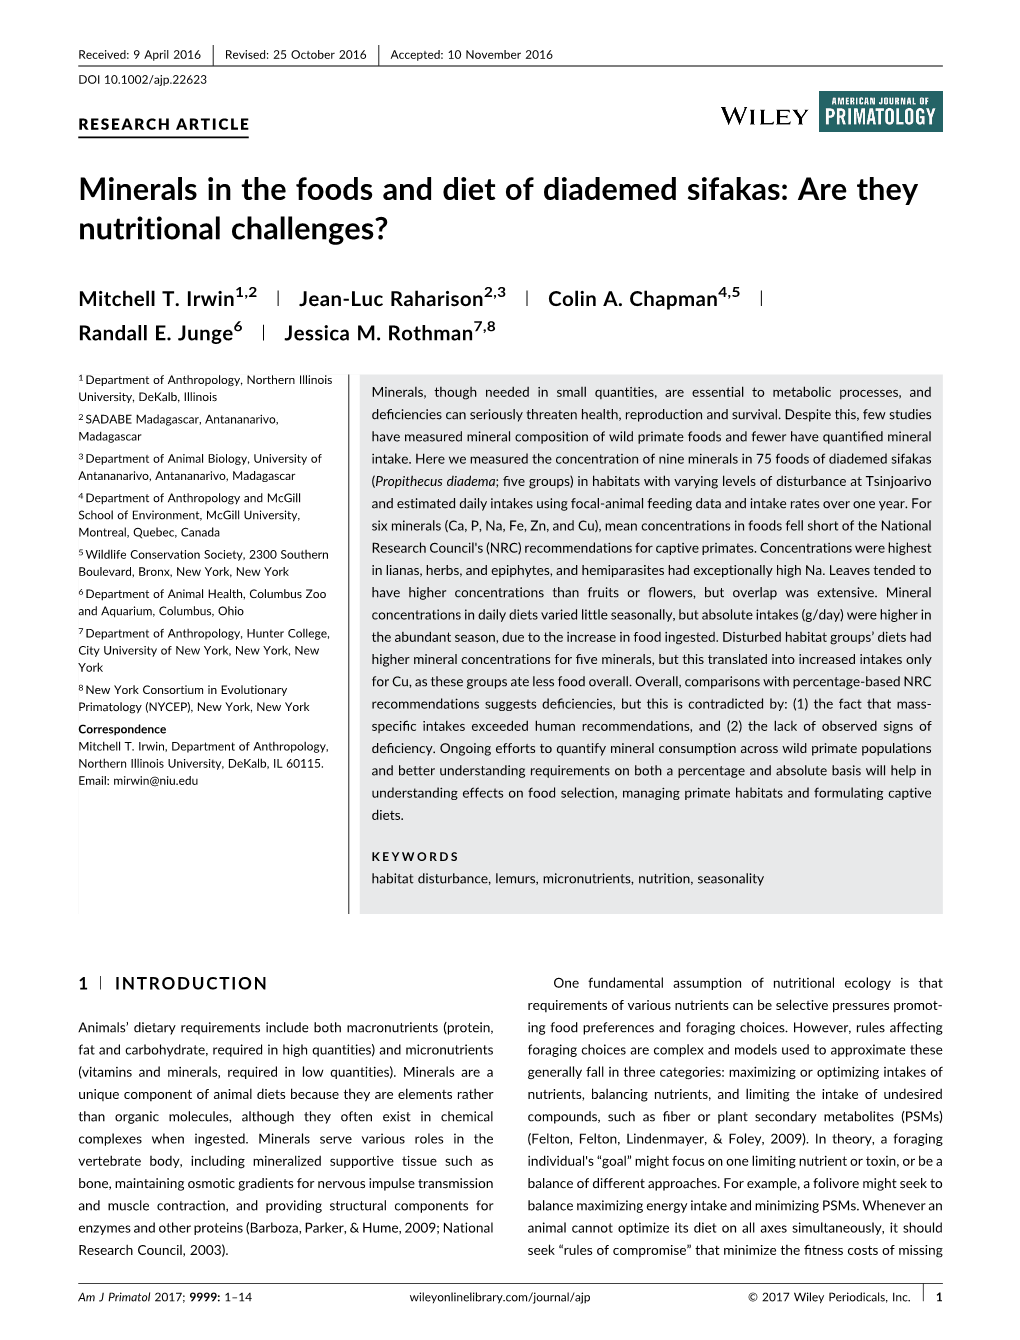 Minerals in the Foods and Diet of Diademed Sifakas: Are They Nutritional Challenges?